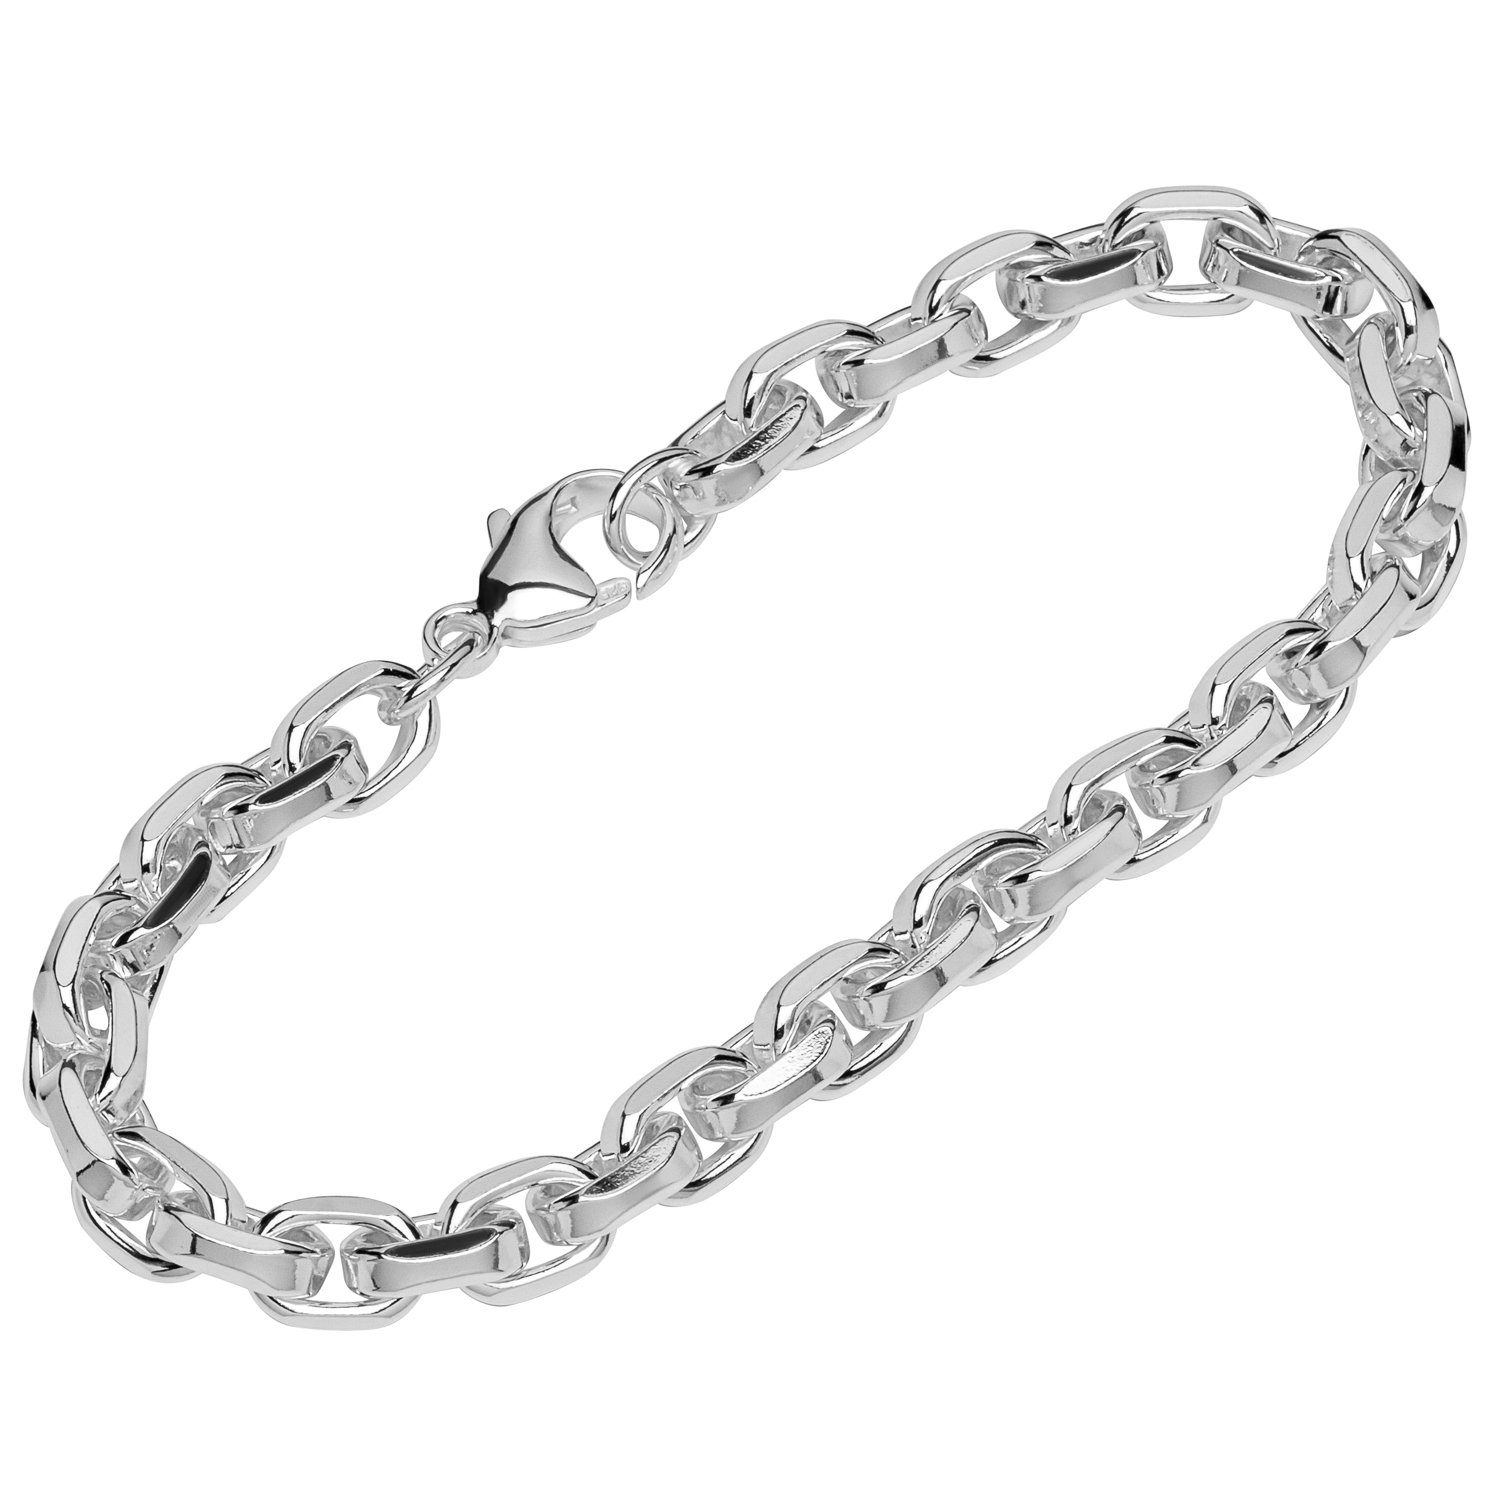 Sterling in Made Stück), Ankerkette NKlaus 925 (1 Germany 6 Silberarmband 22cm Silber fach Armband